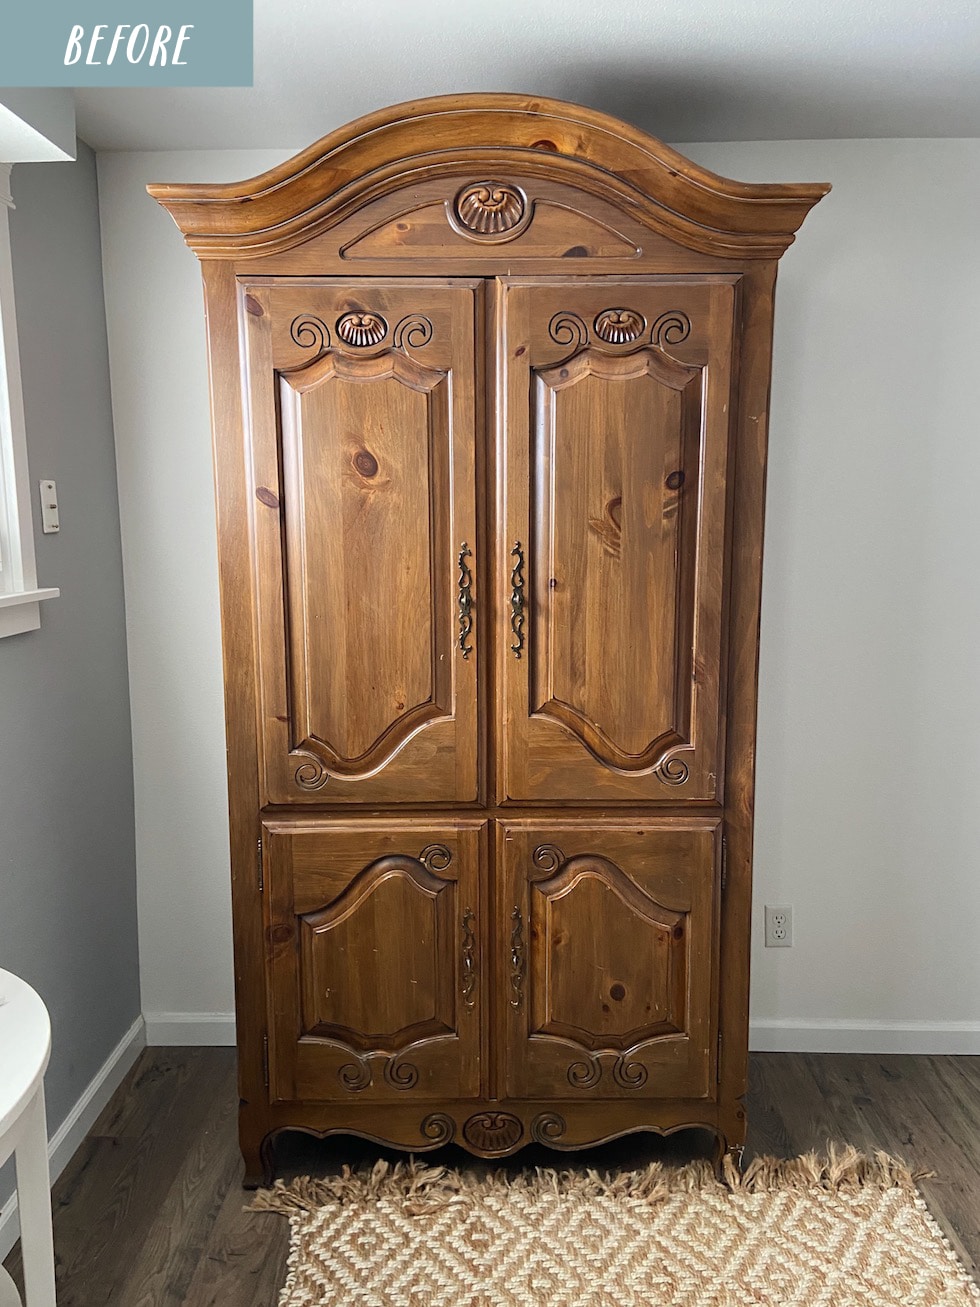 Before & After: Painted Armoire with Milk Paint